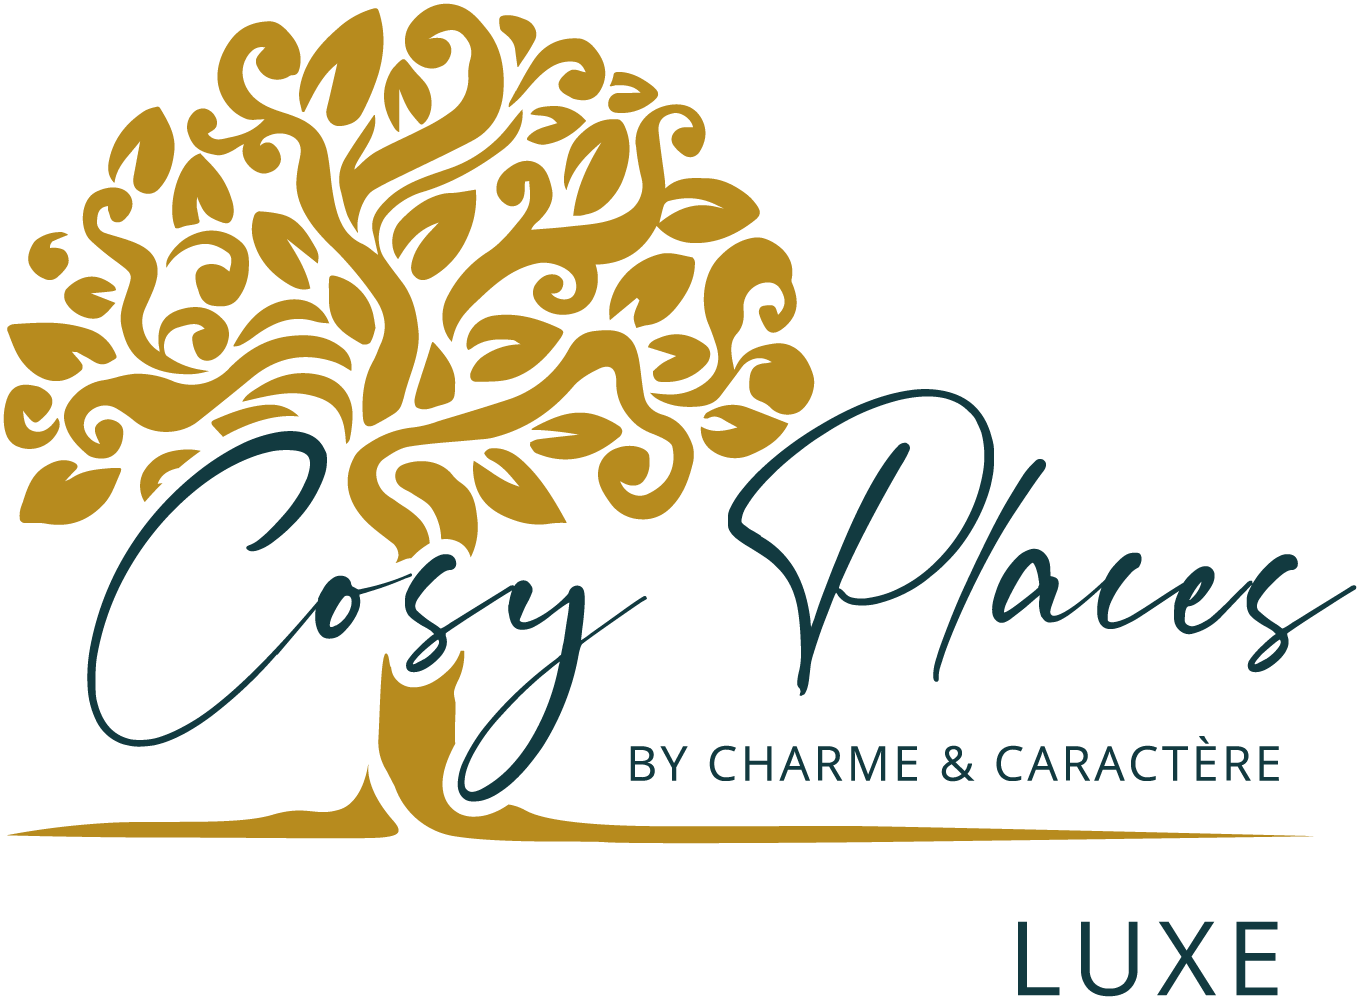 Cosy Places Lux tunesien hotel dar tozeur label award win africa buisness